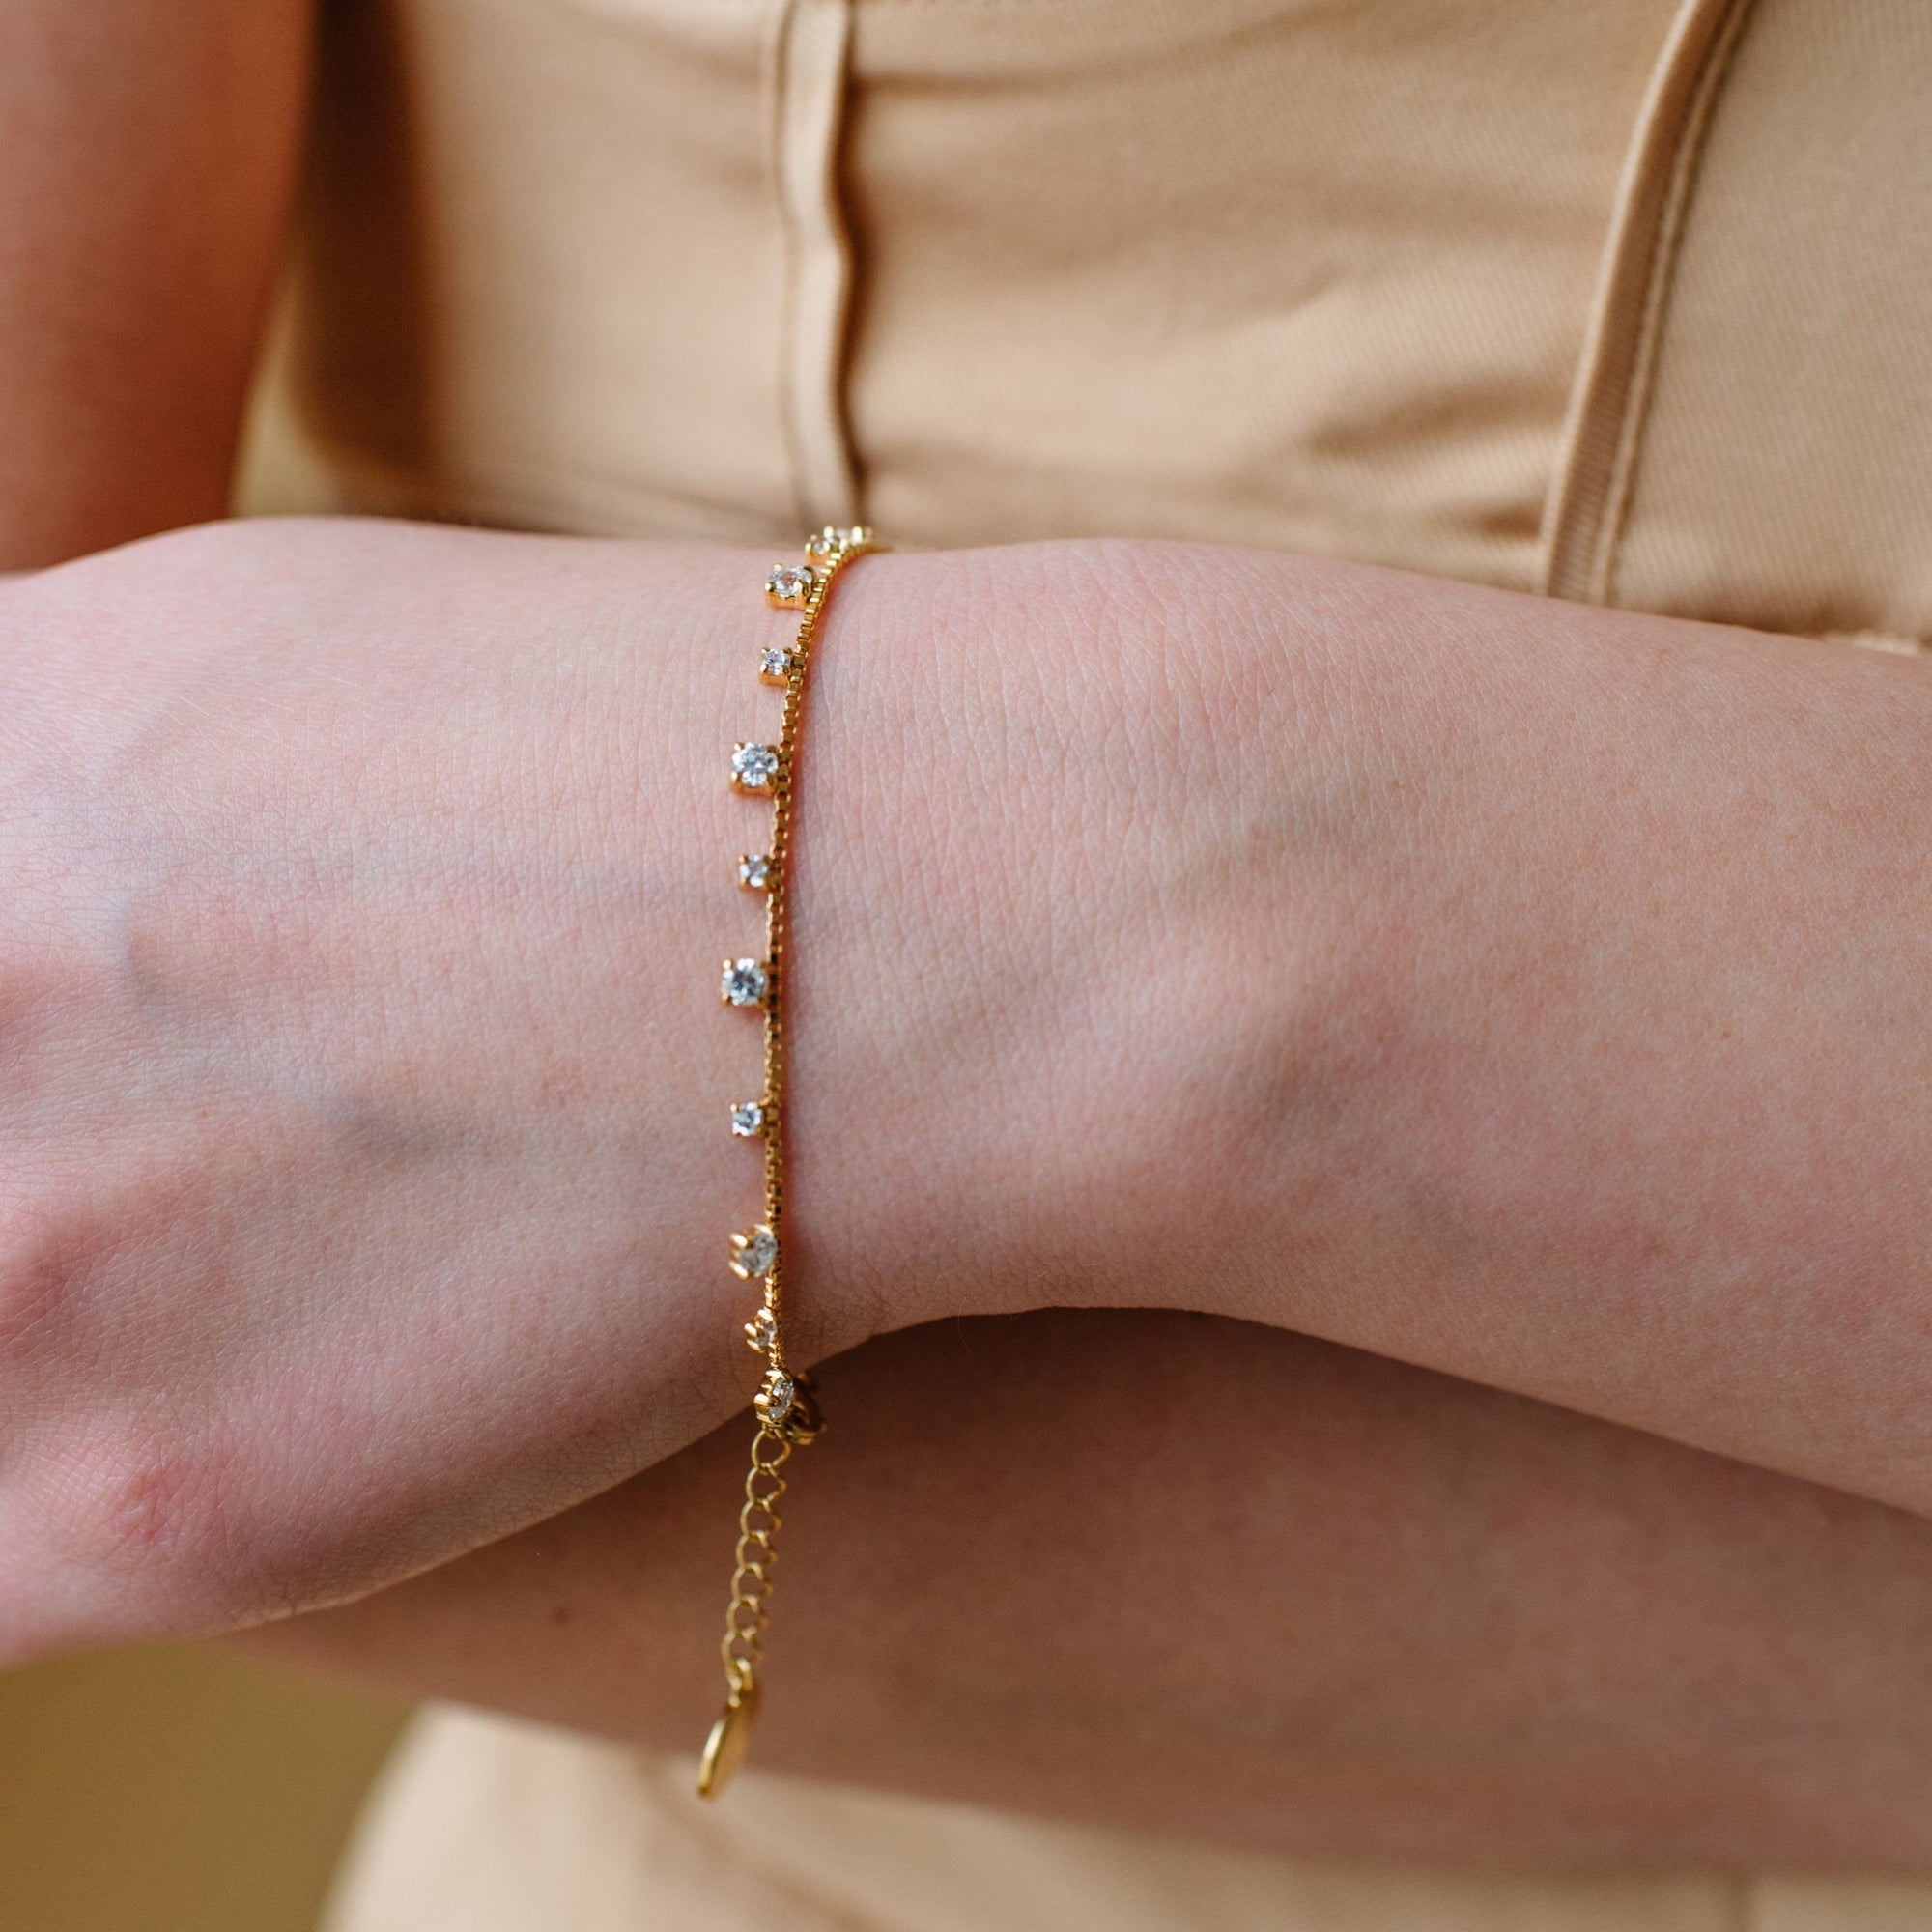 SCATTERED LOVE BRACELET - CUBIC ZIRCONIA & GOLD - SO PRETTY CARA COTTER